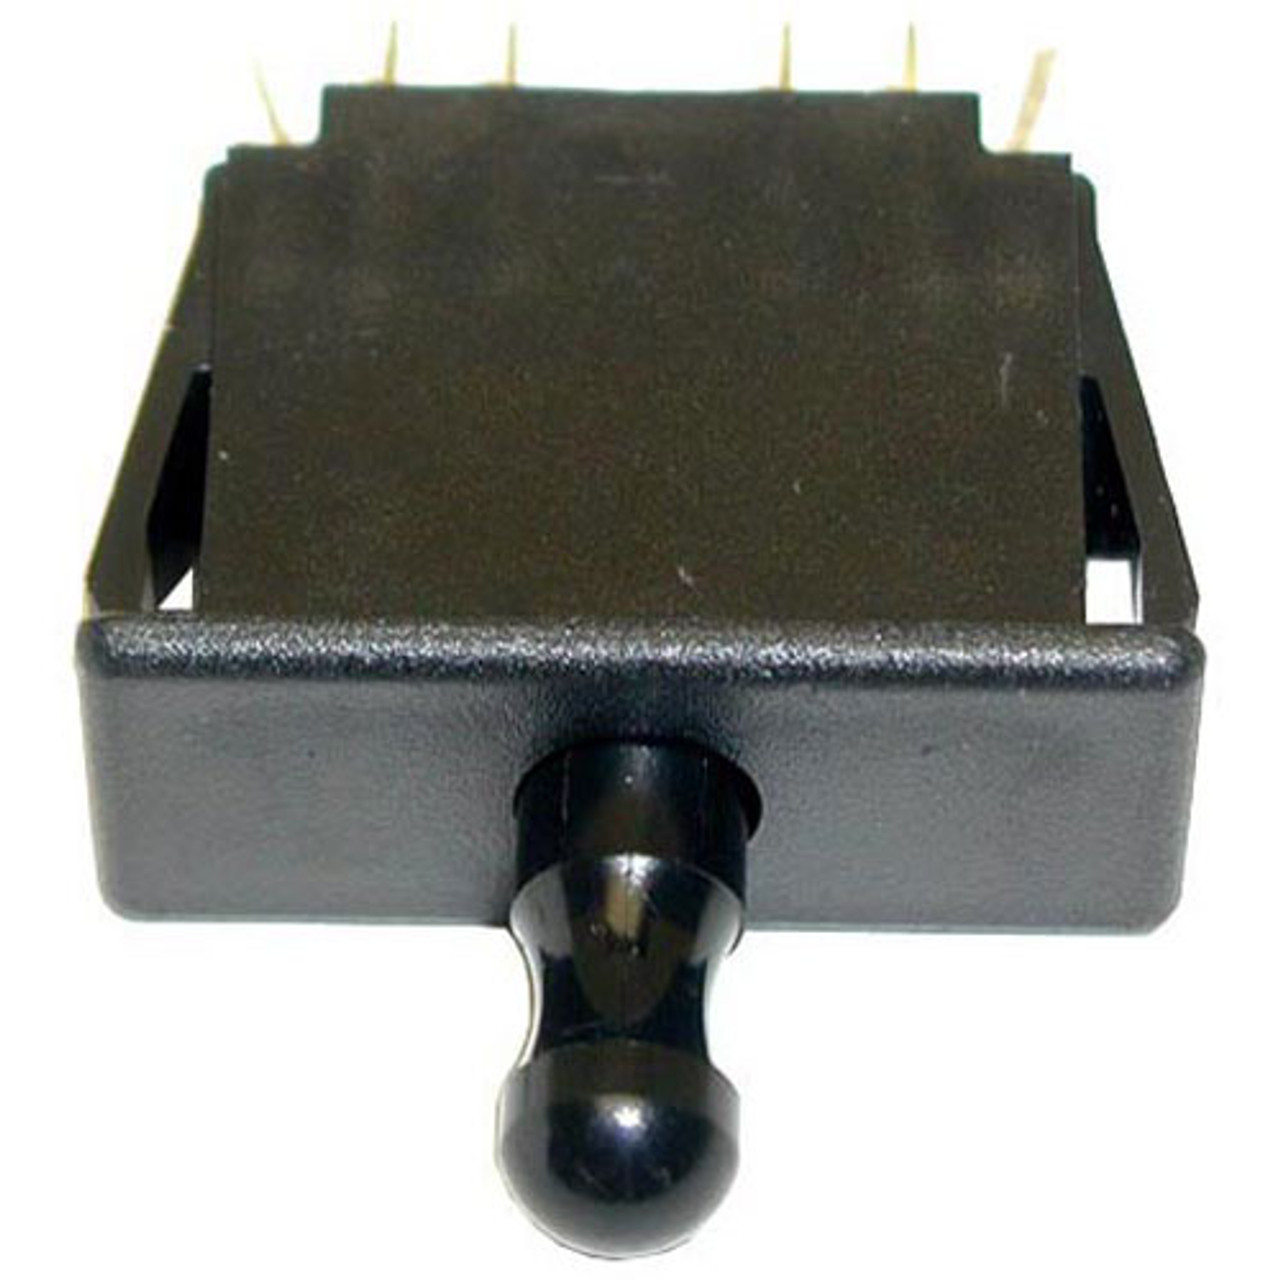 Switch 1/2 X 1-1/2 2 Pole - Replacement Part For Southbend 1177566